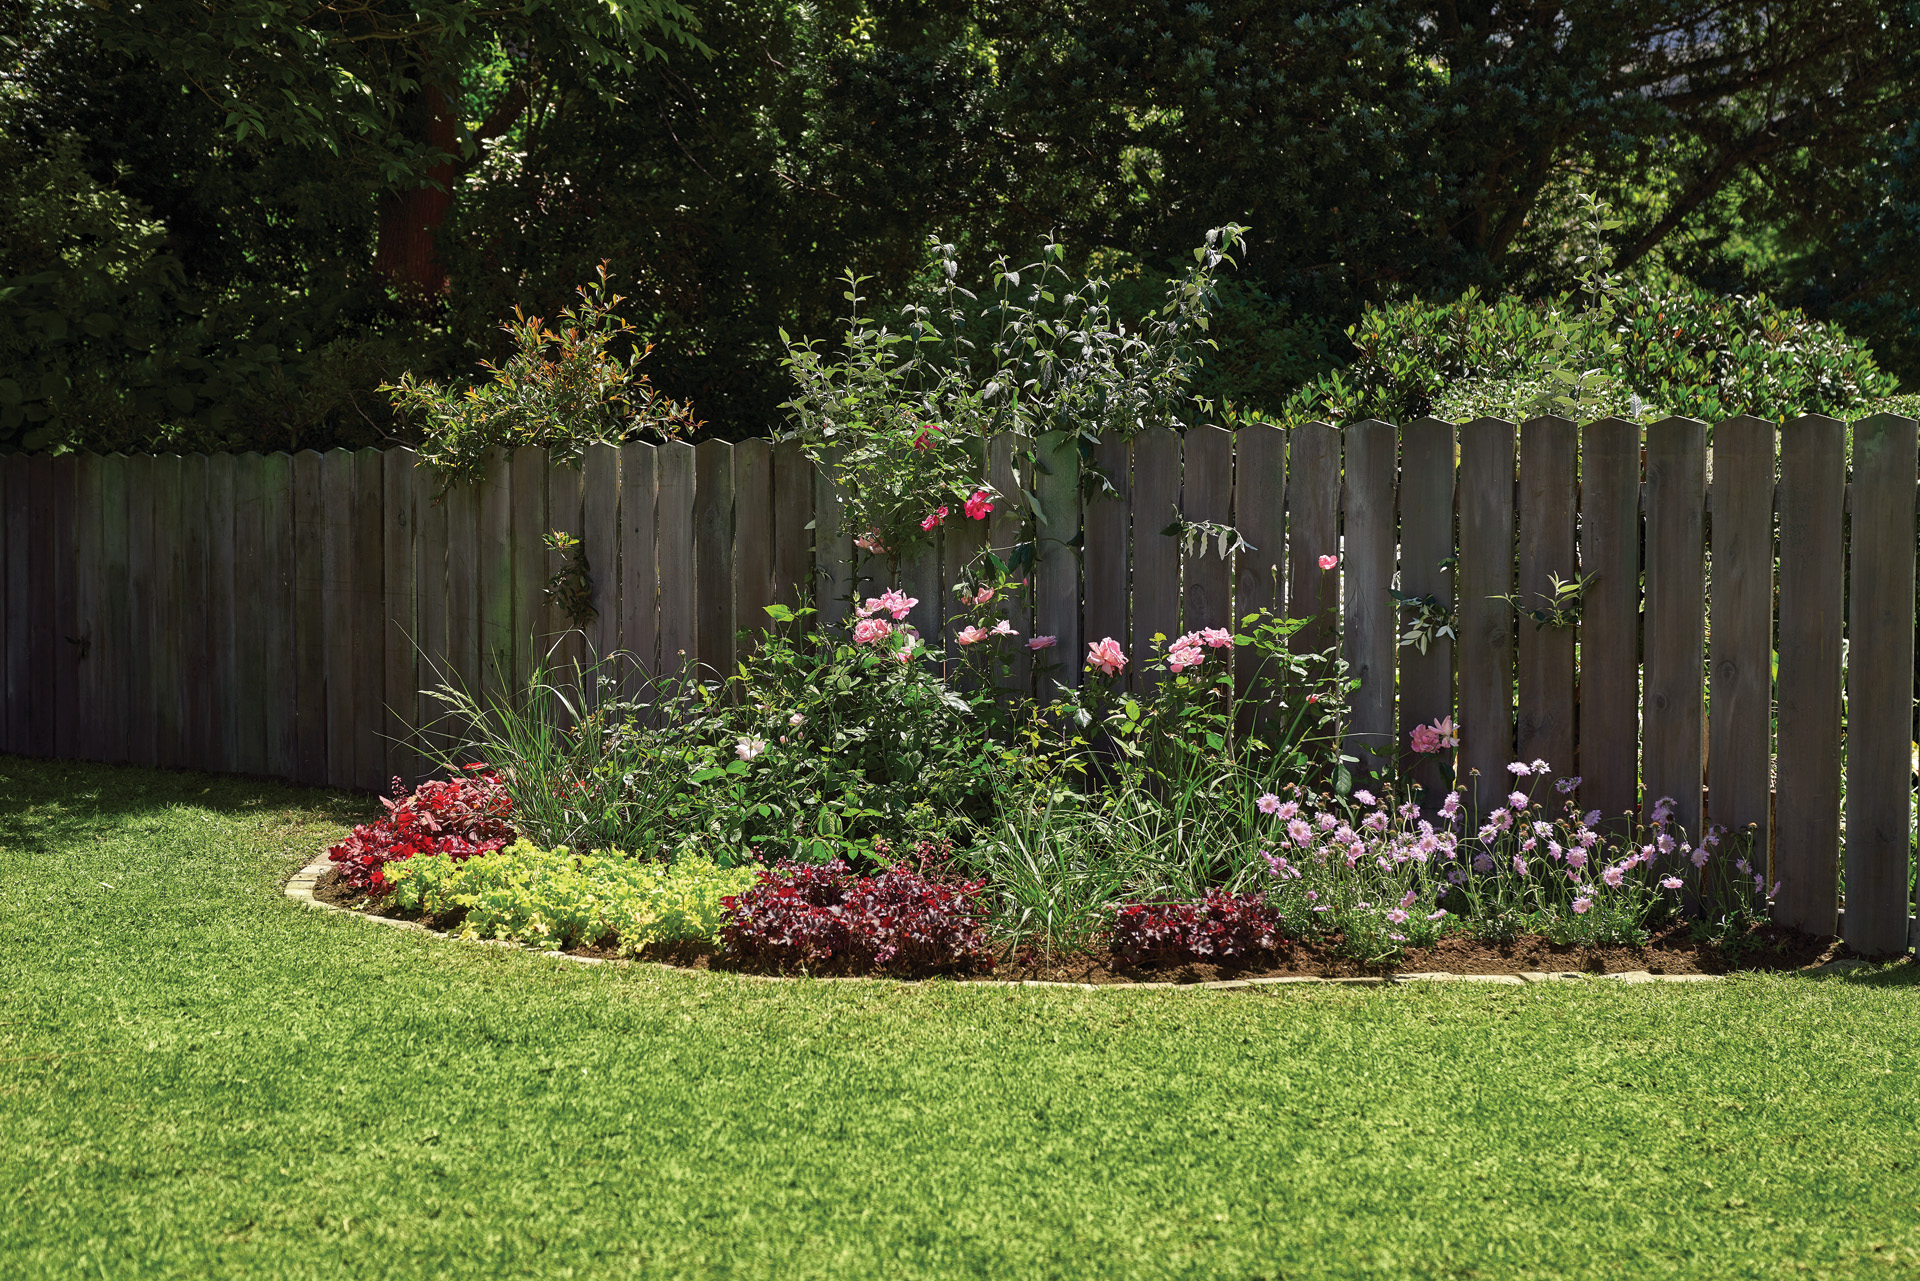 A colourful perennial flower bed in a garden beside a wooden fence